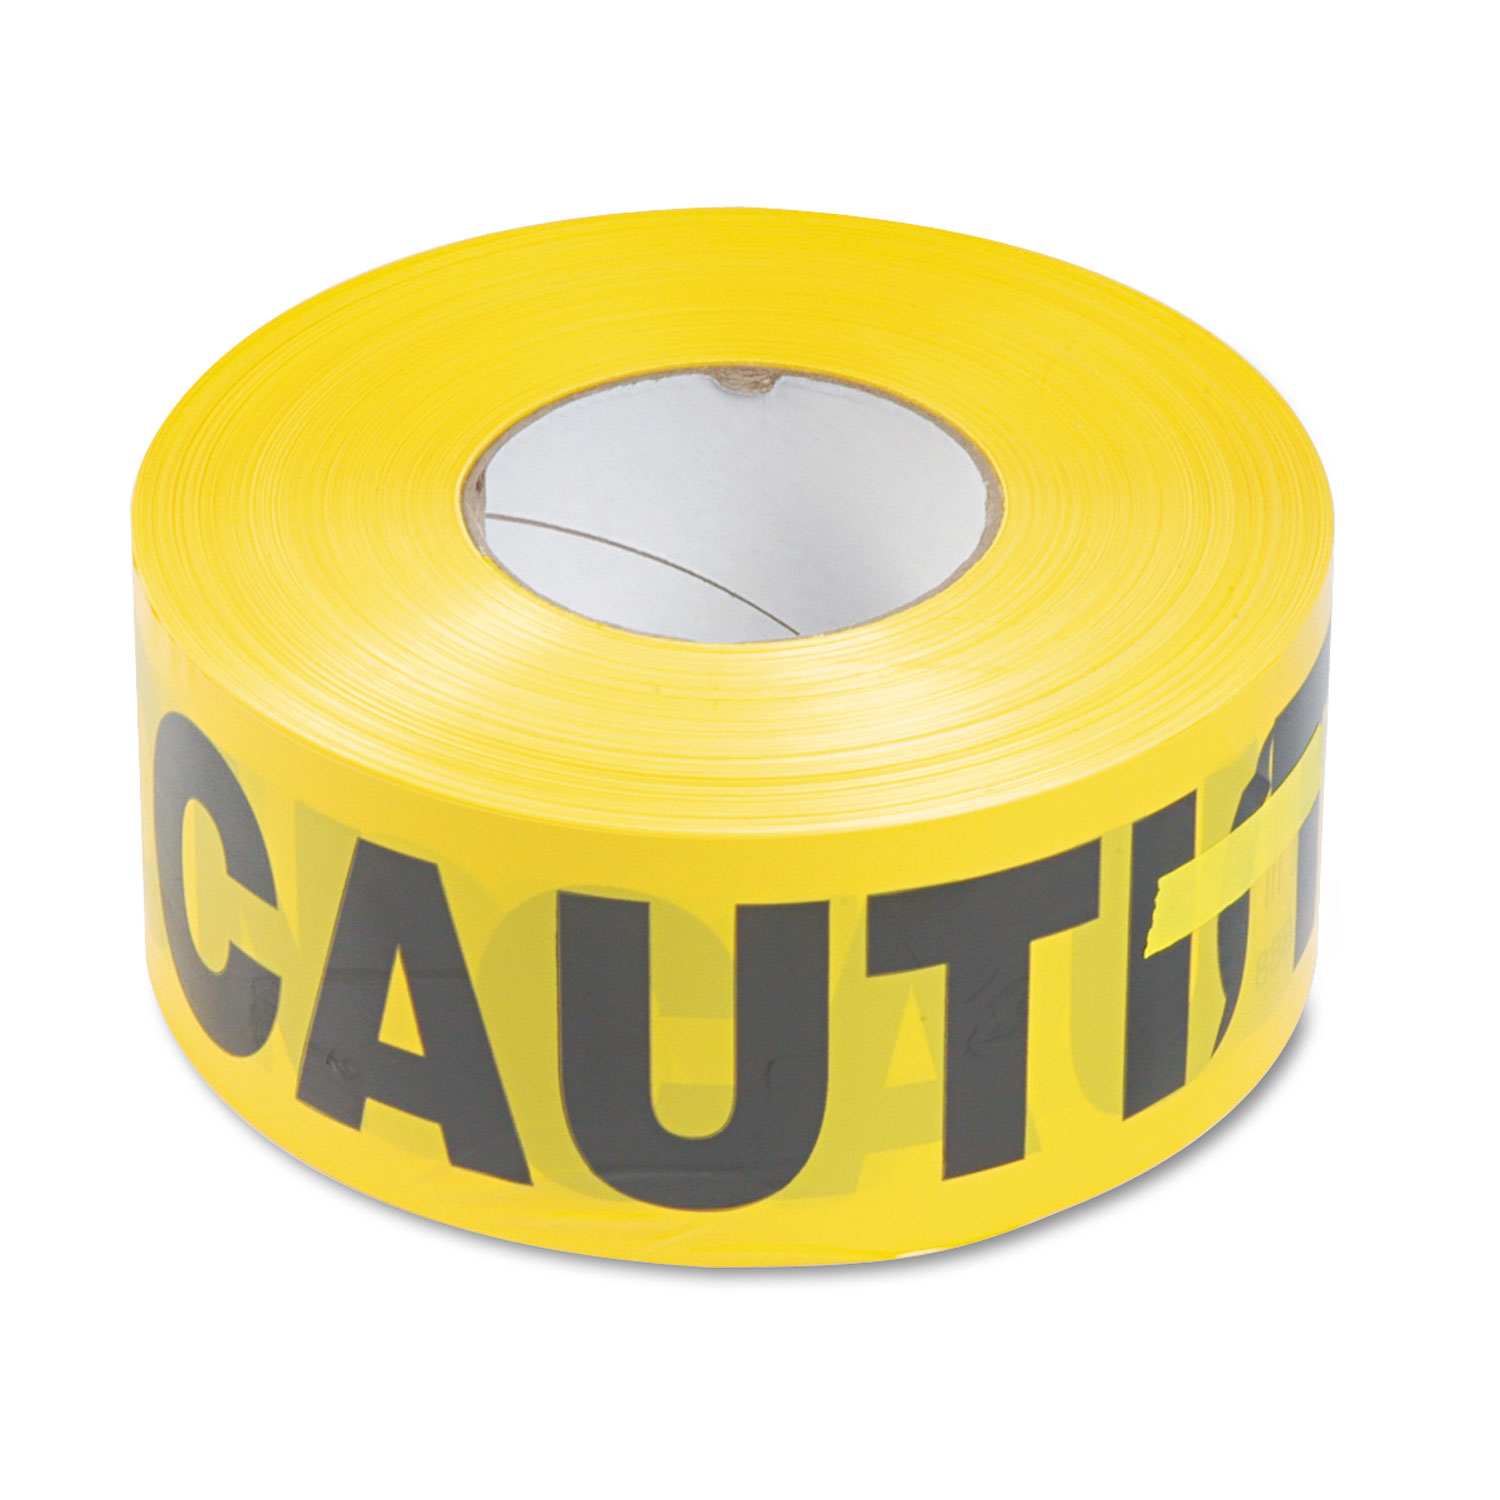  Tatco 10700 Caution Barricade Safety Tape, Yellow, 3w x 1000ft Roll (TCO10700) 